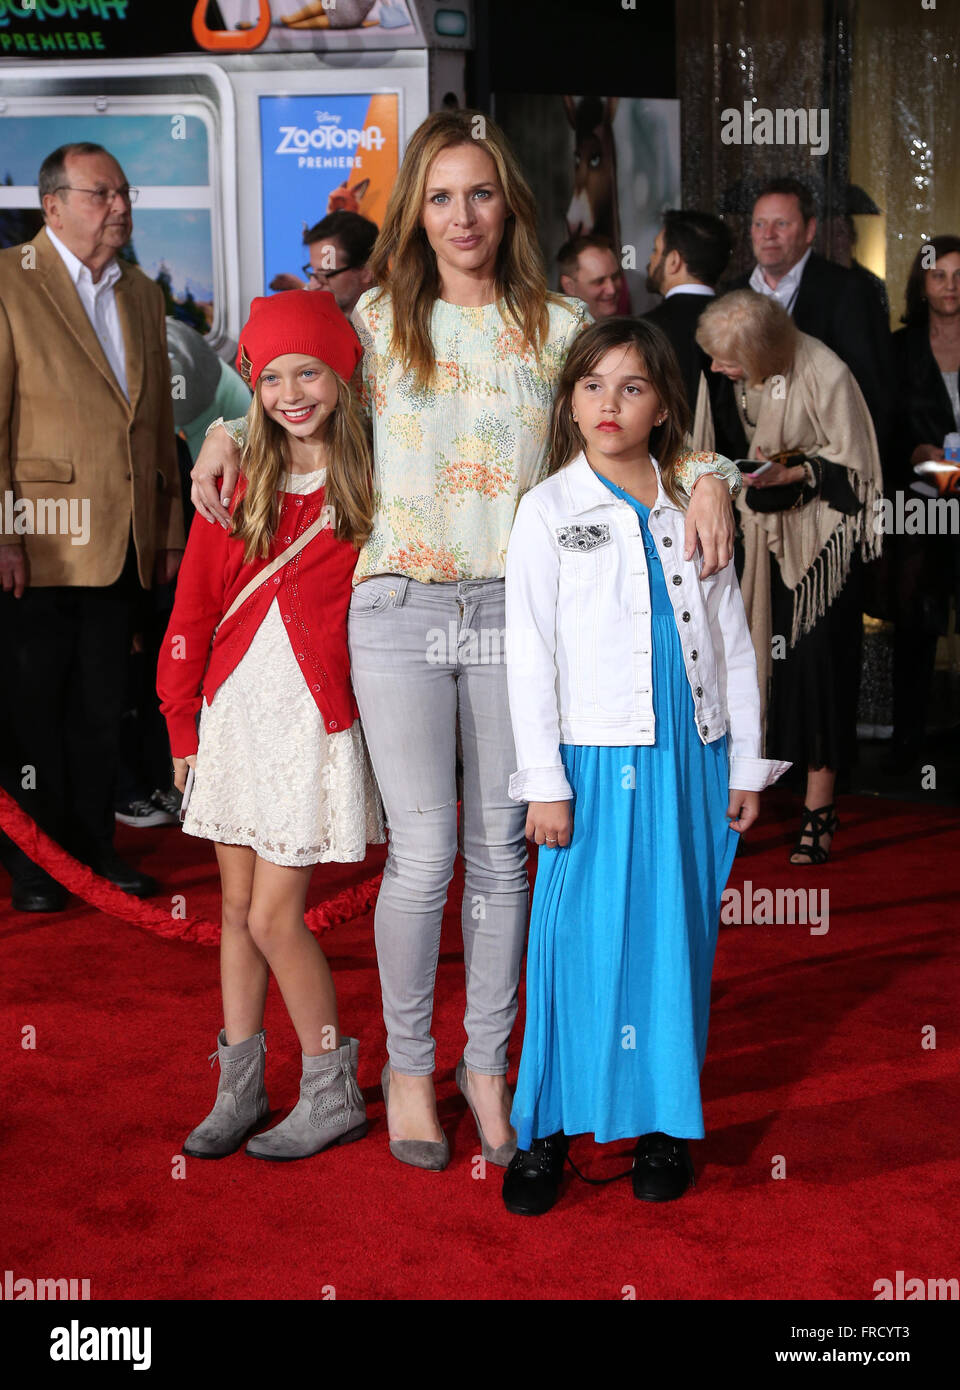 Los Angeles Premiere of Walt Disney Animation Studios' 'Zootopia' held at  the El Capitan Theatre - Arrivals Featuring: Jessalyn Gilsig, Penelope  Salomon Where: Hollywood, California, United States When: 17 Feb 2016 Stock  Photo - Alamy